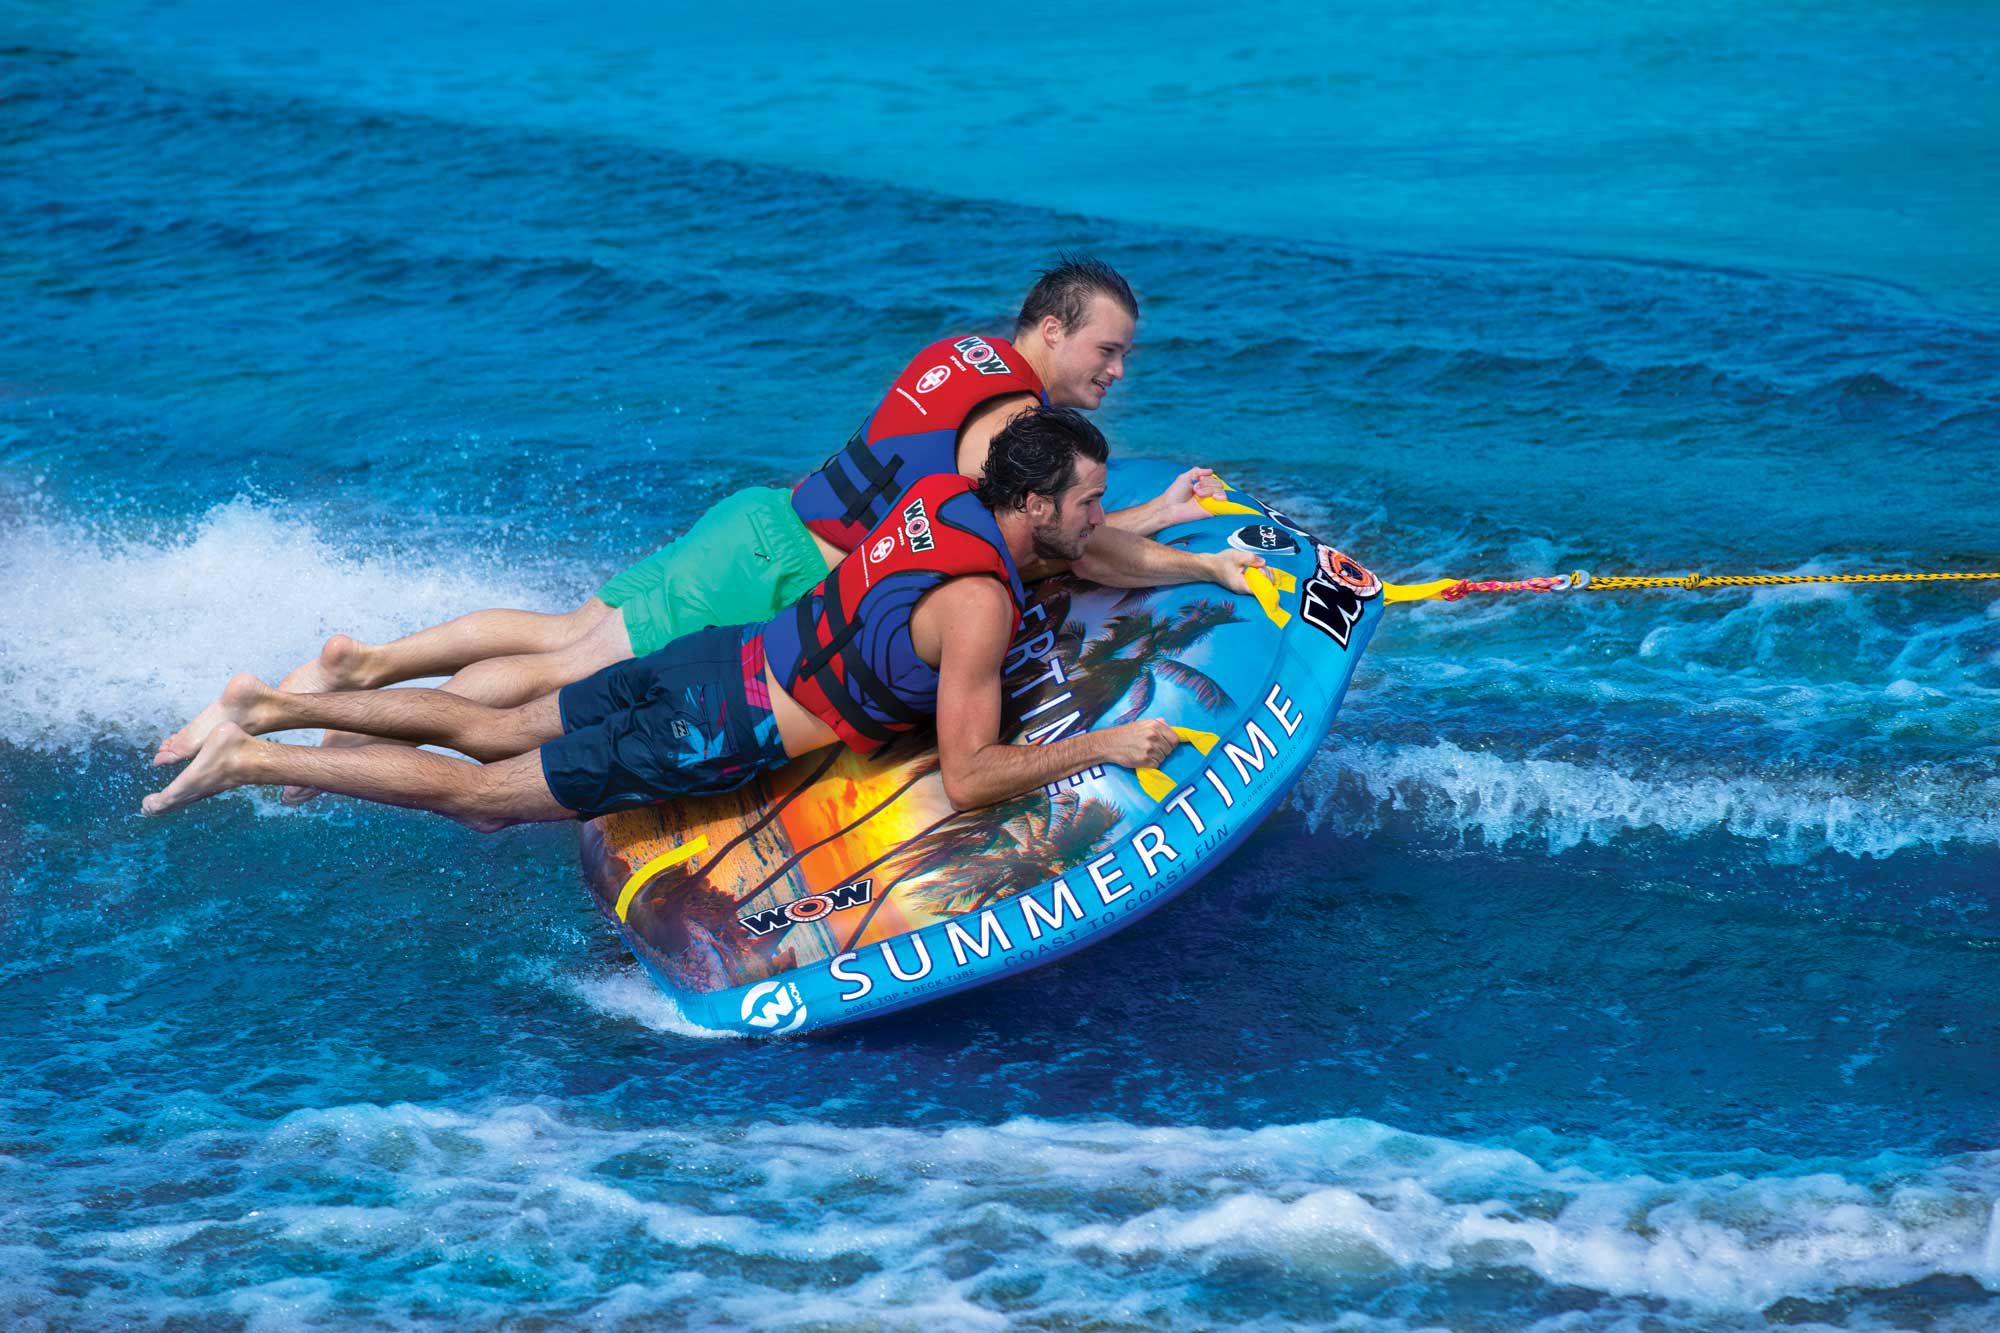 WOW Summertime 2-Person Towable Tube